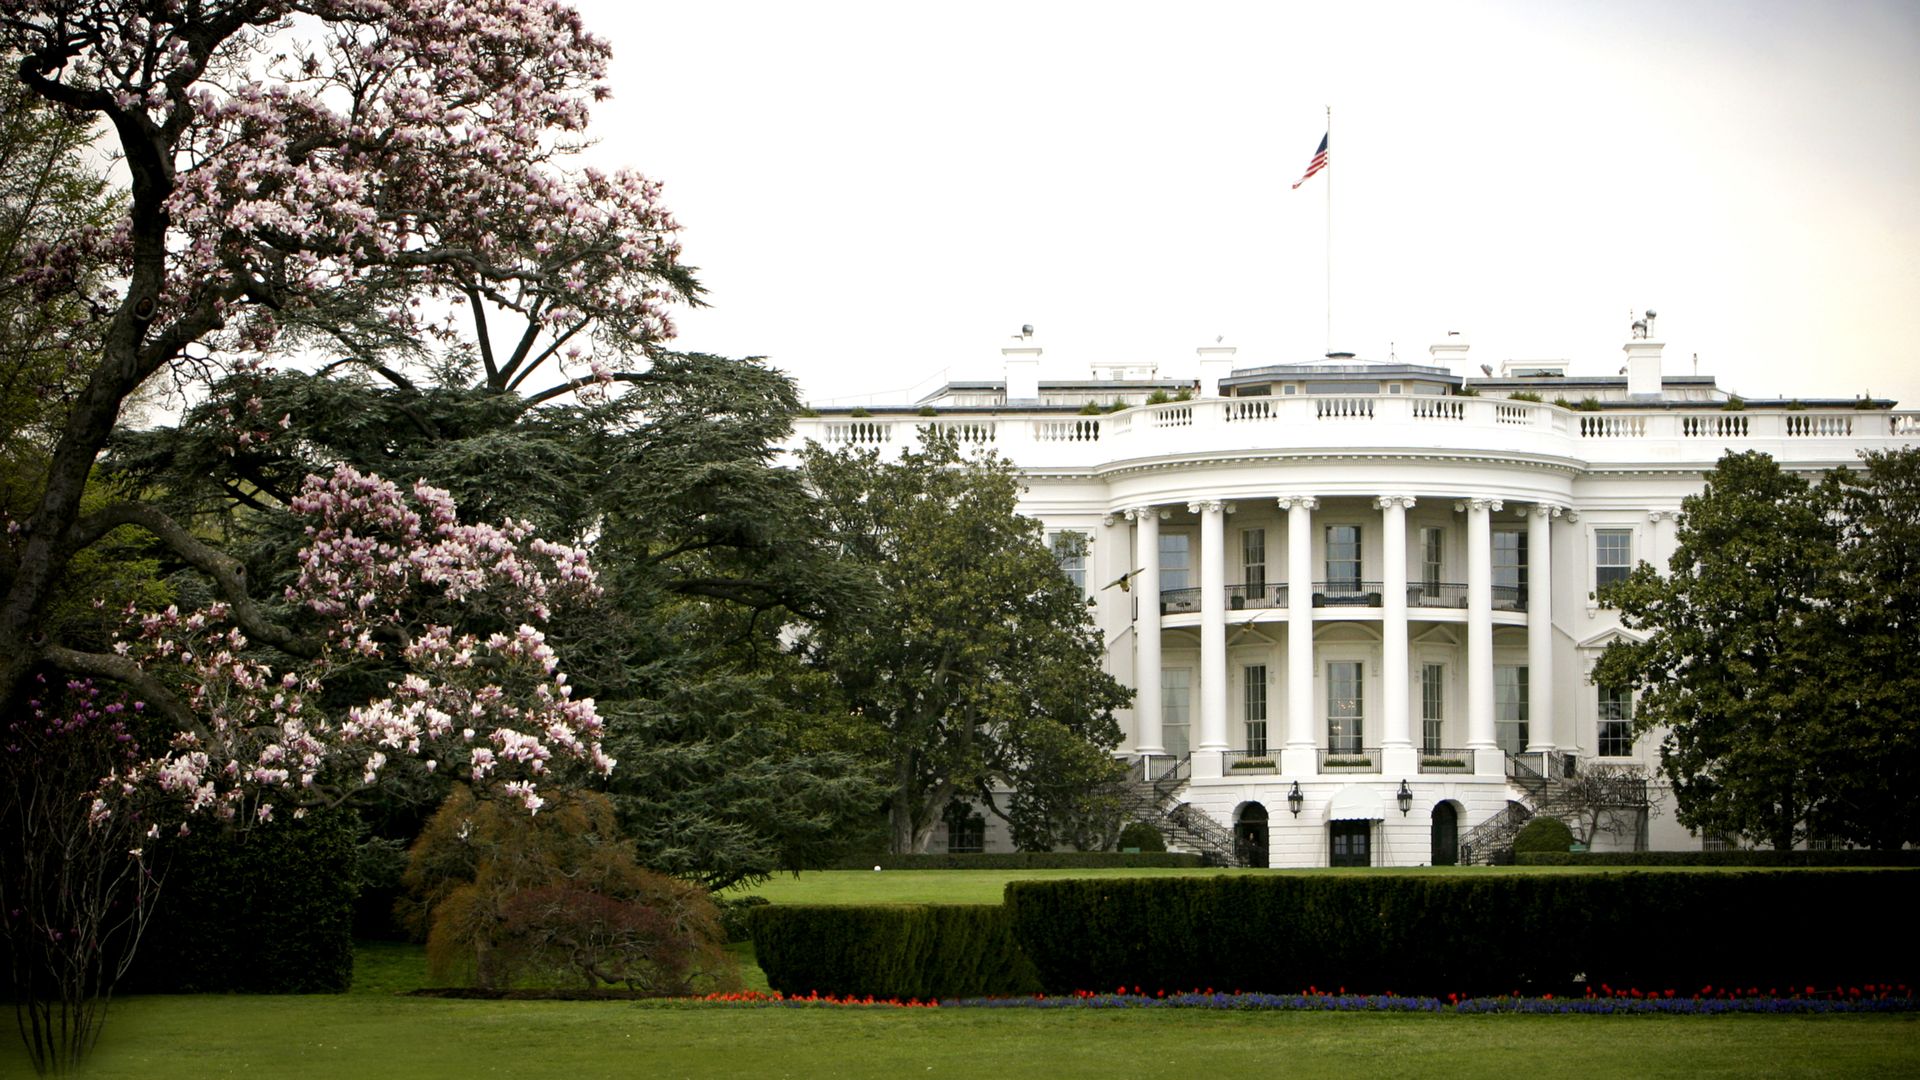 Photo of the exterior of the White House with cherry blossoms blooming